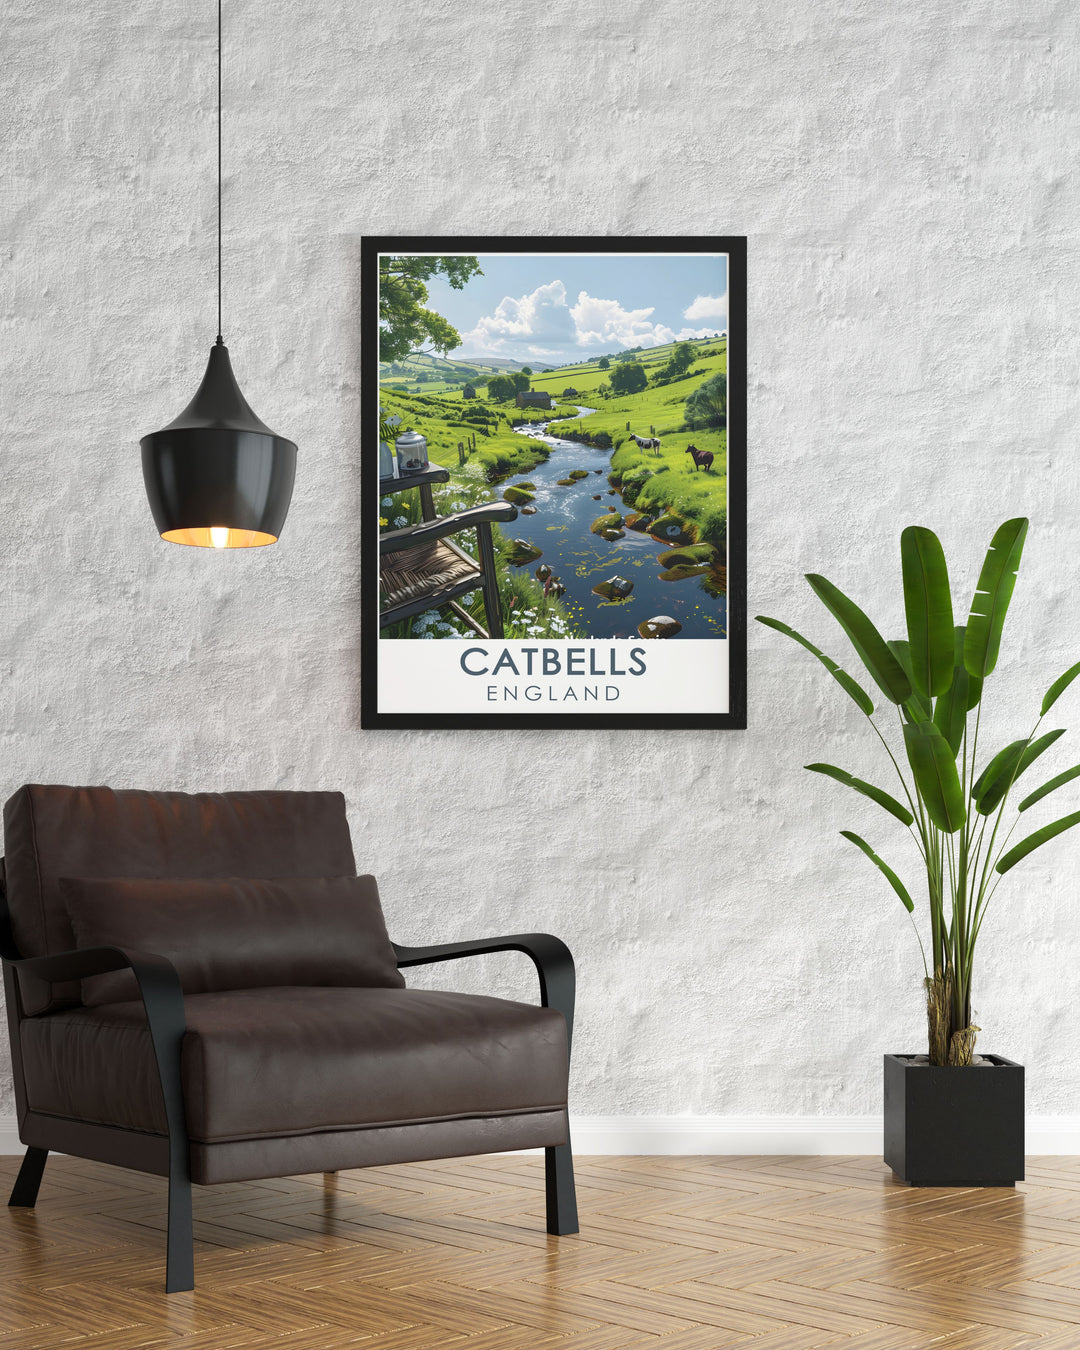 Catbells Summit wall art offering a detailed and vibrant portrayal of the iconic summit and Newlands Valley making it a striking addition to your home decor and an inspiring piece for travel enthusiasts